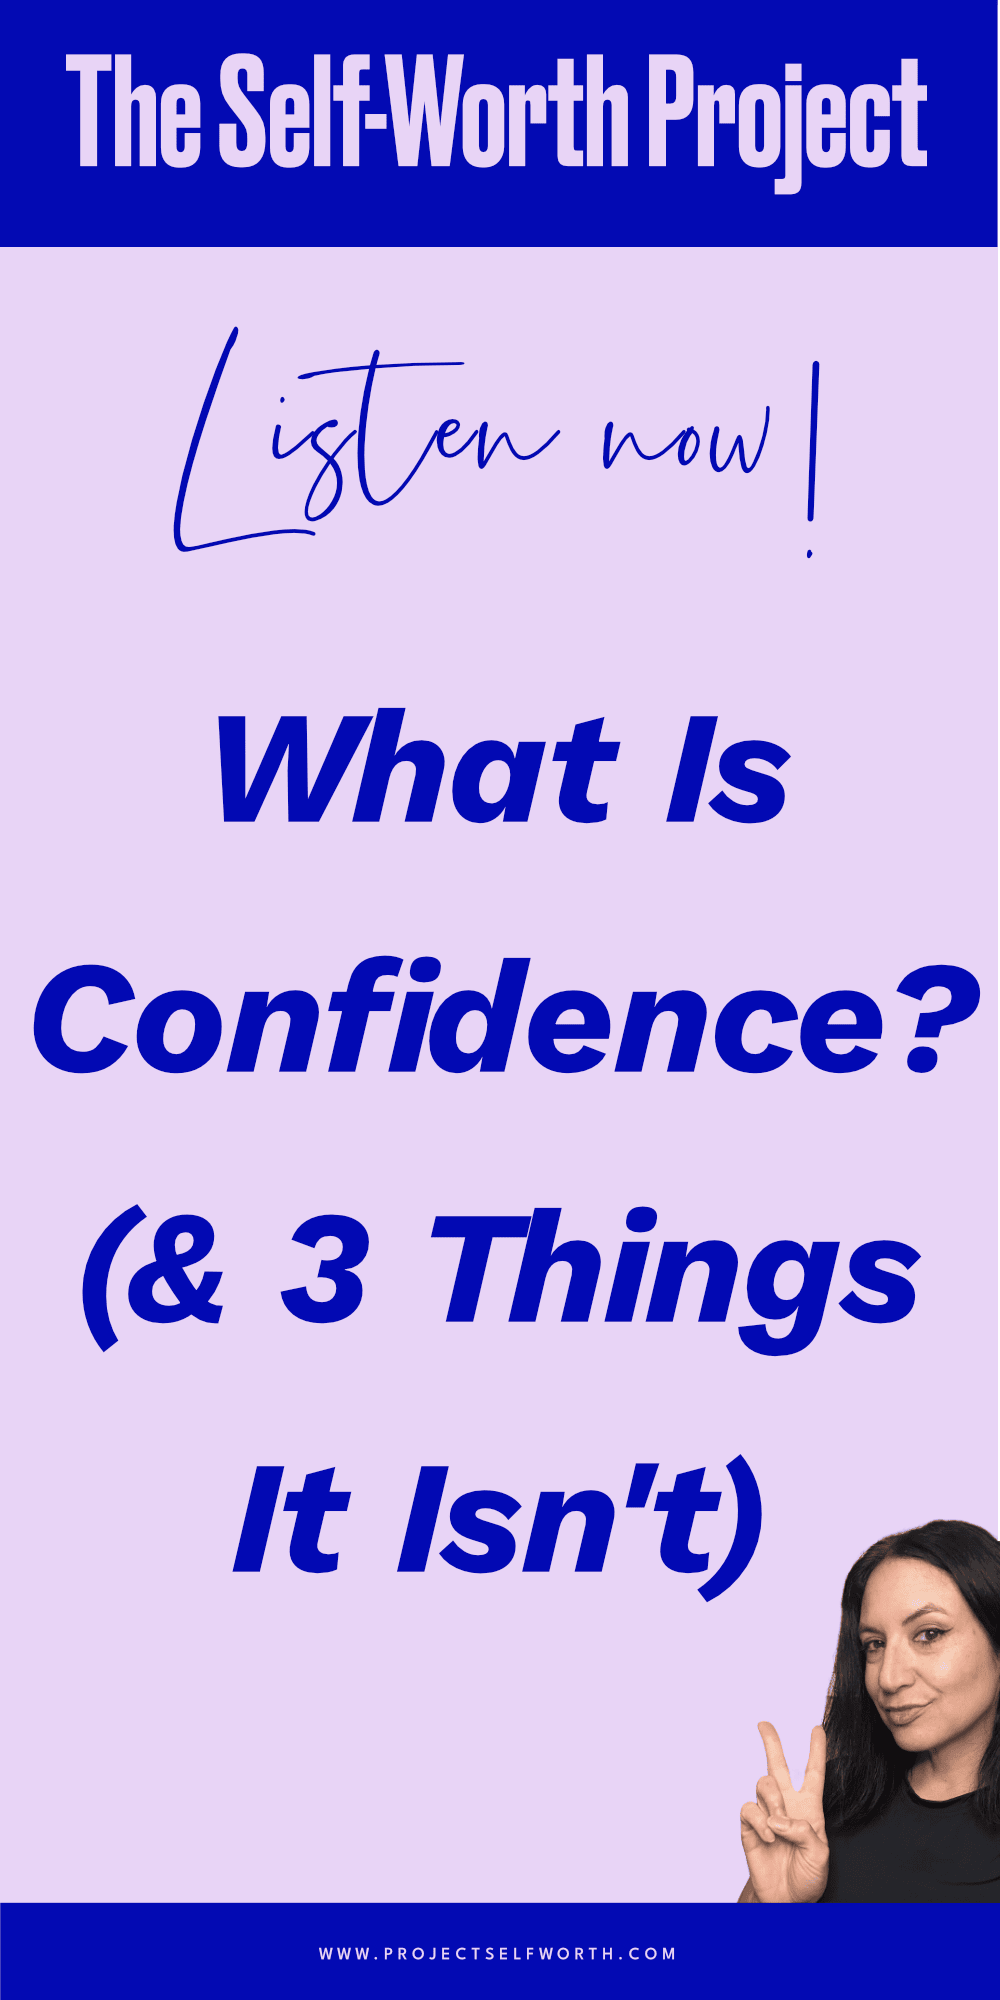 Episode #18: What Is Confidence? (& 3 Things It Isn't)